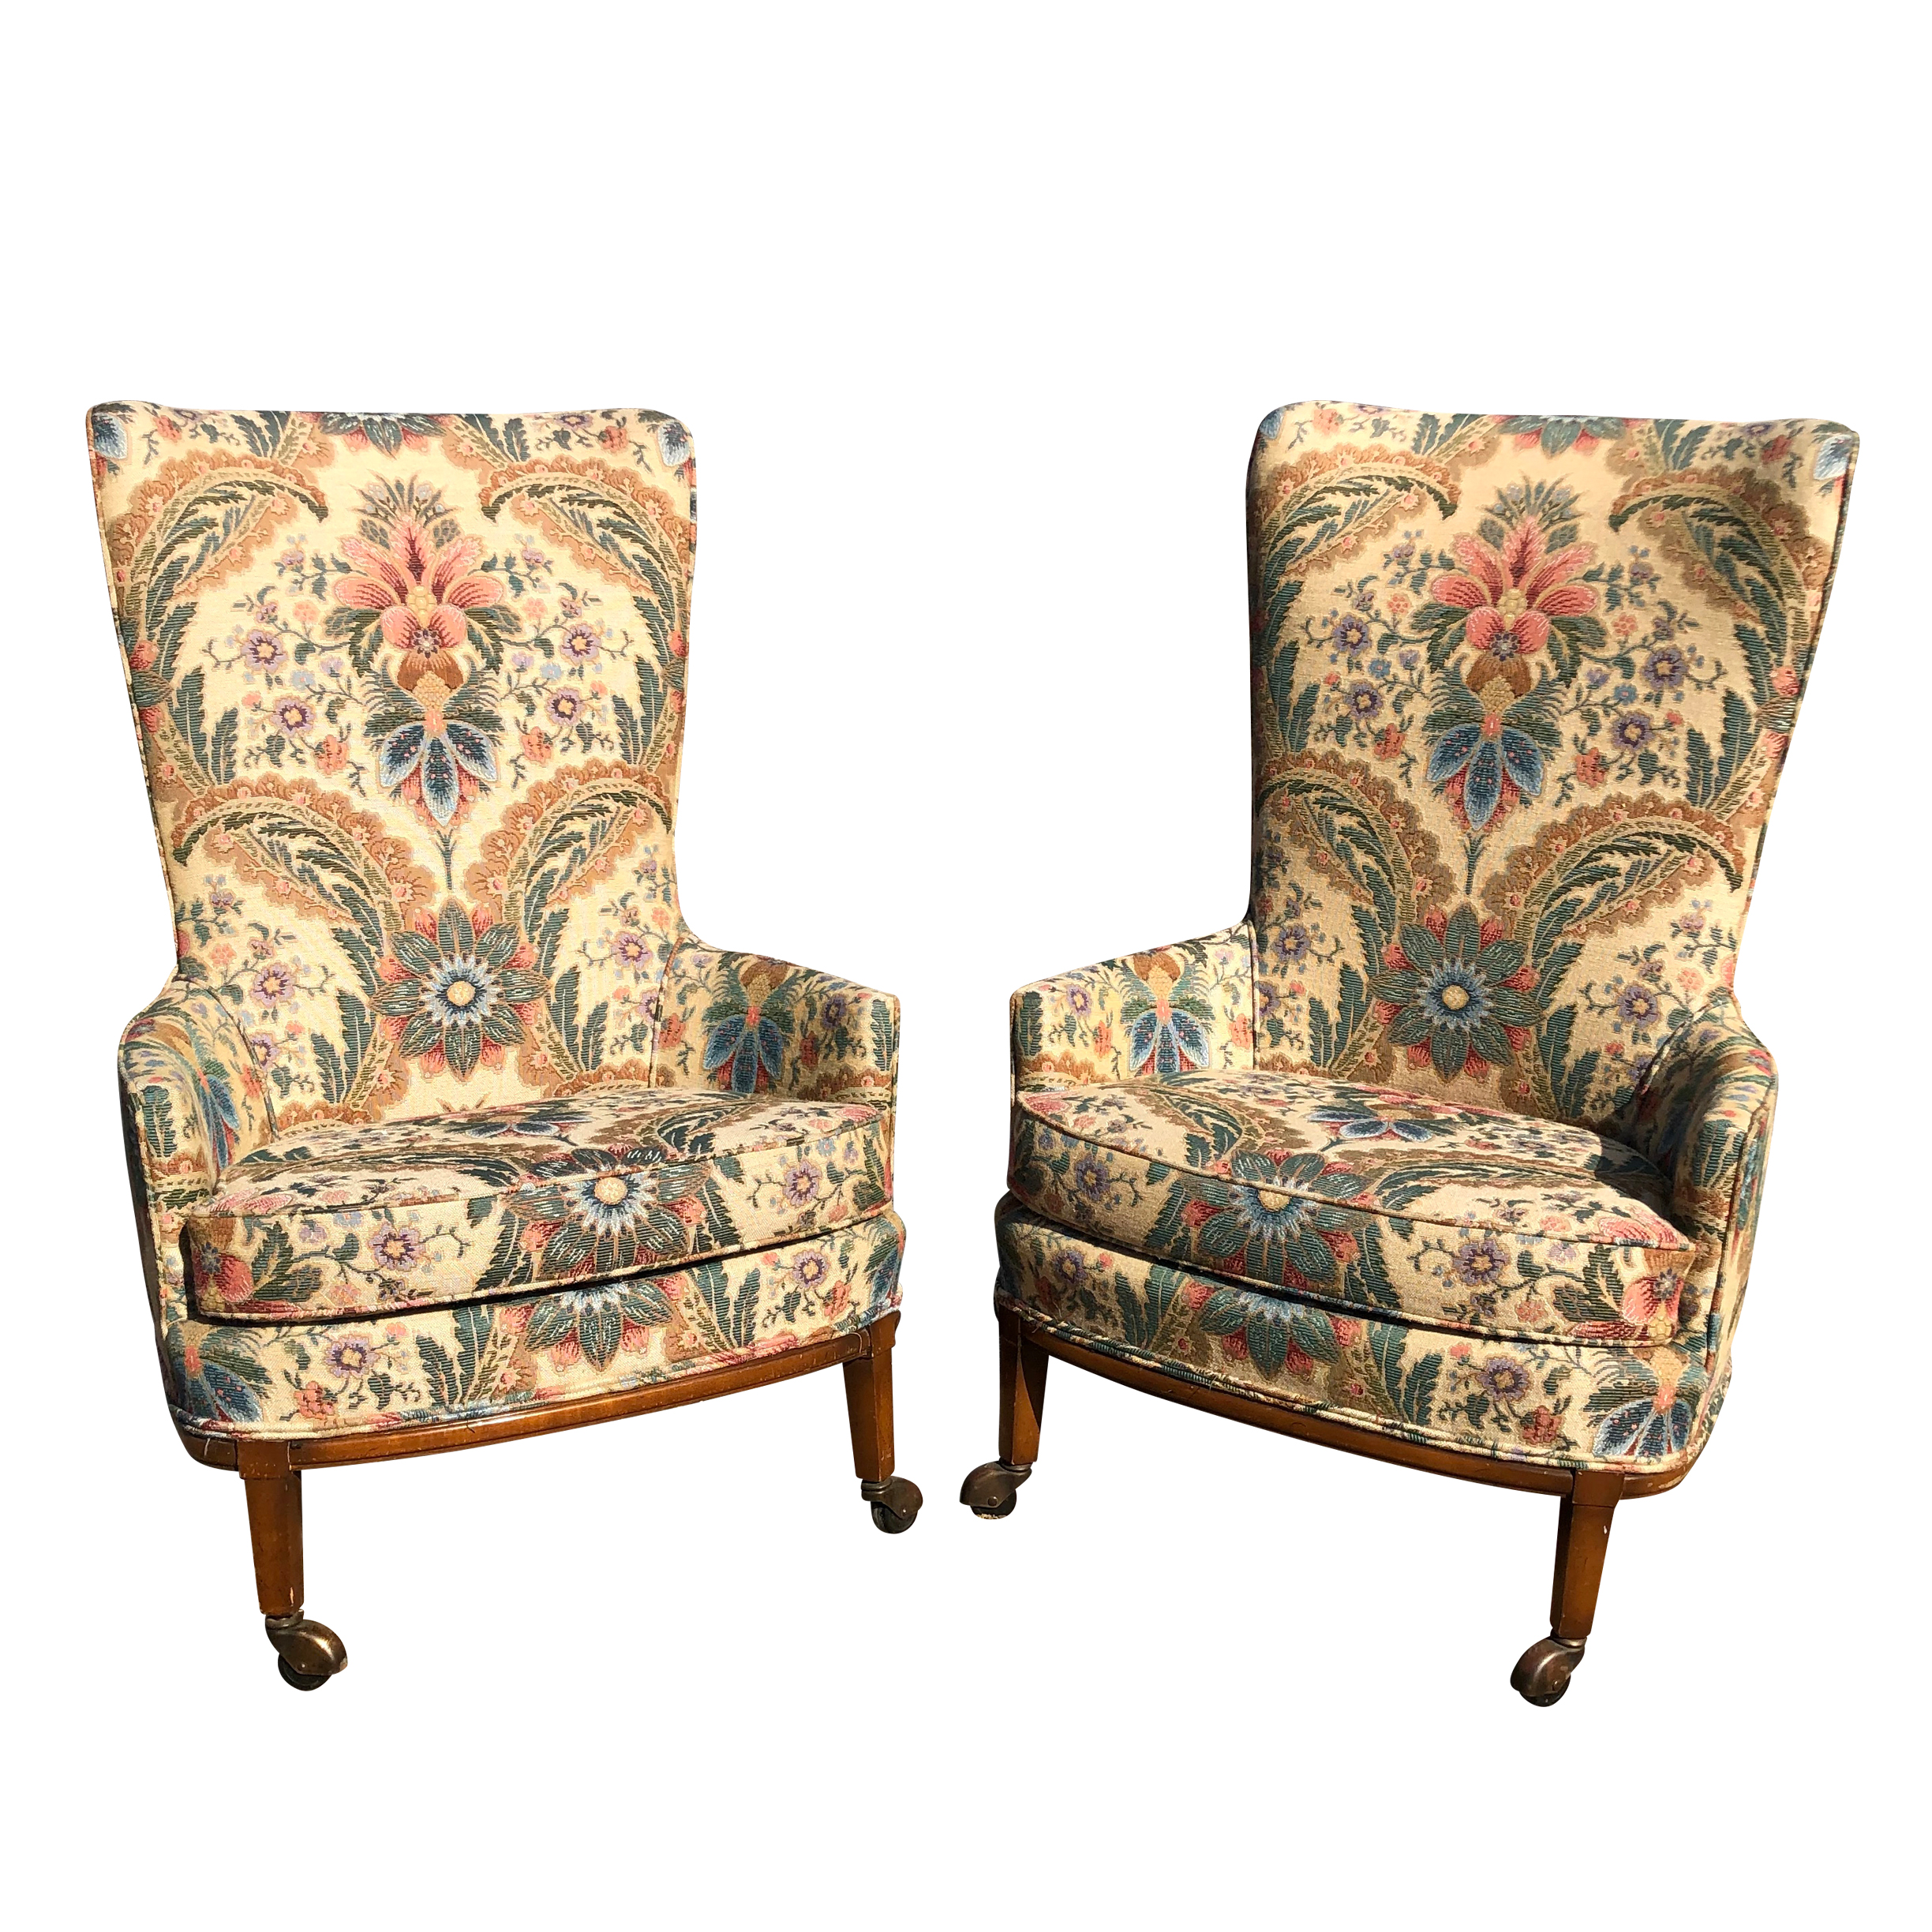 Vintage Boho Chic Floral Wing Back Accent Club Chairs A